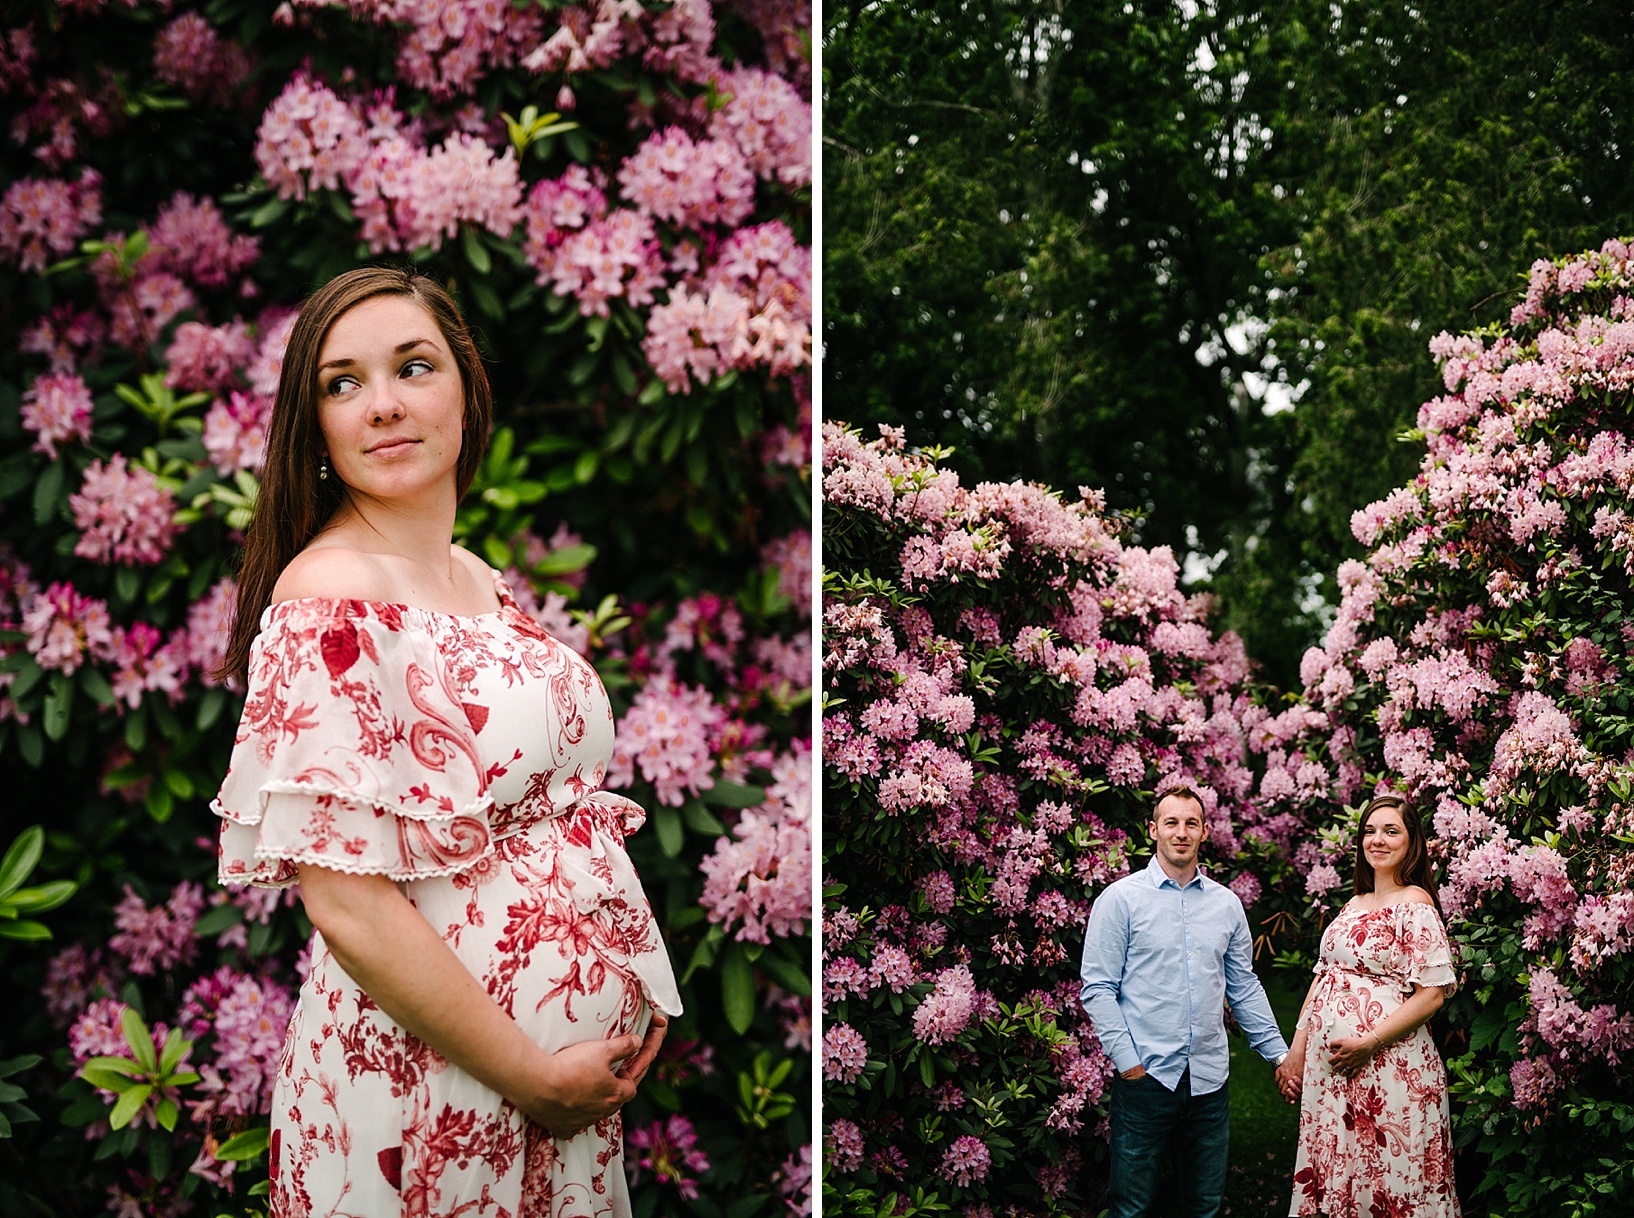 Pregnant brunette woman in a white and red floral dress holds her belly in front of a giant bush of pink flowers